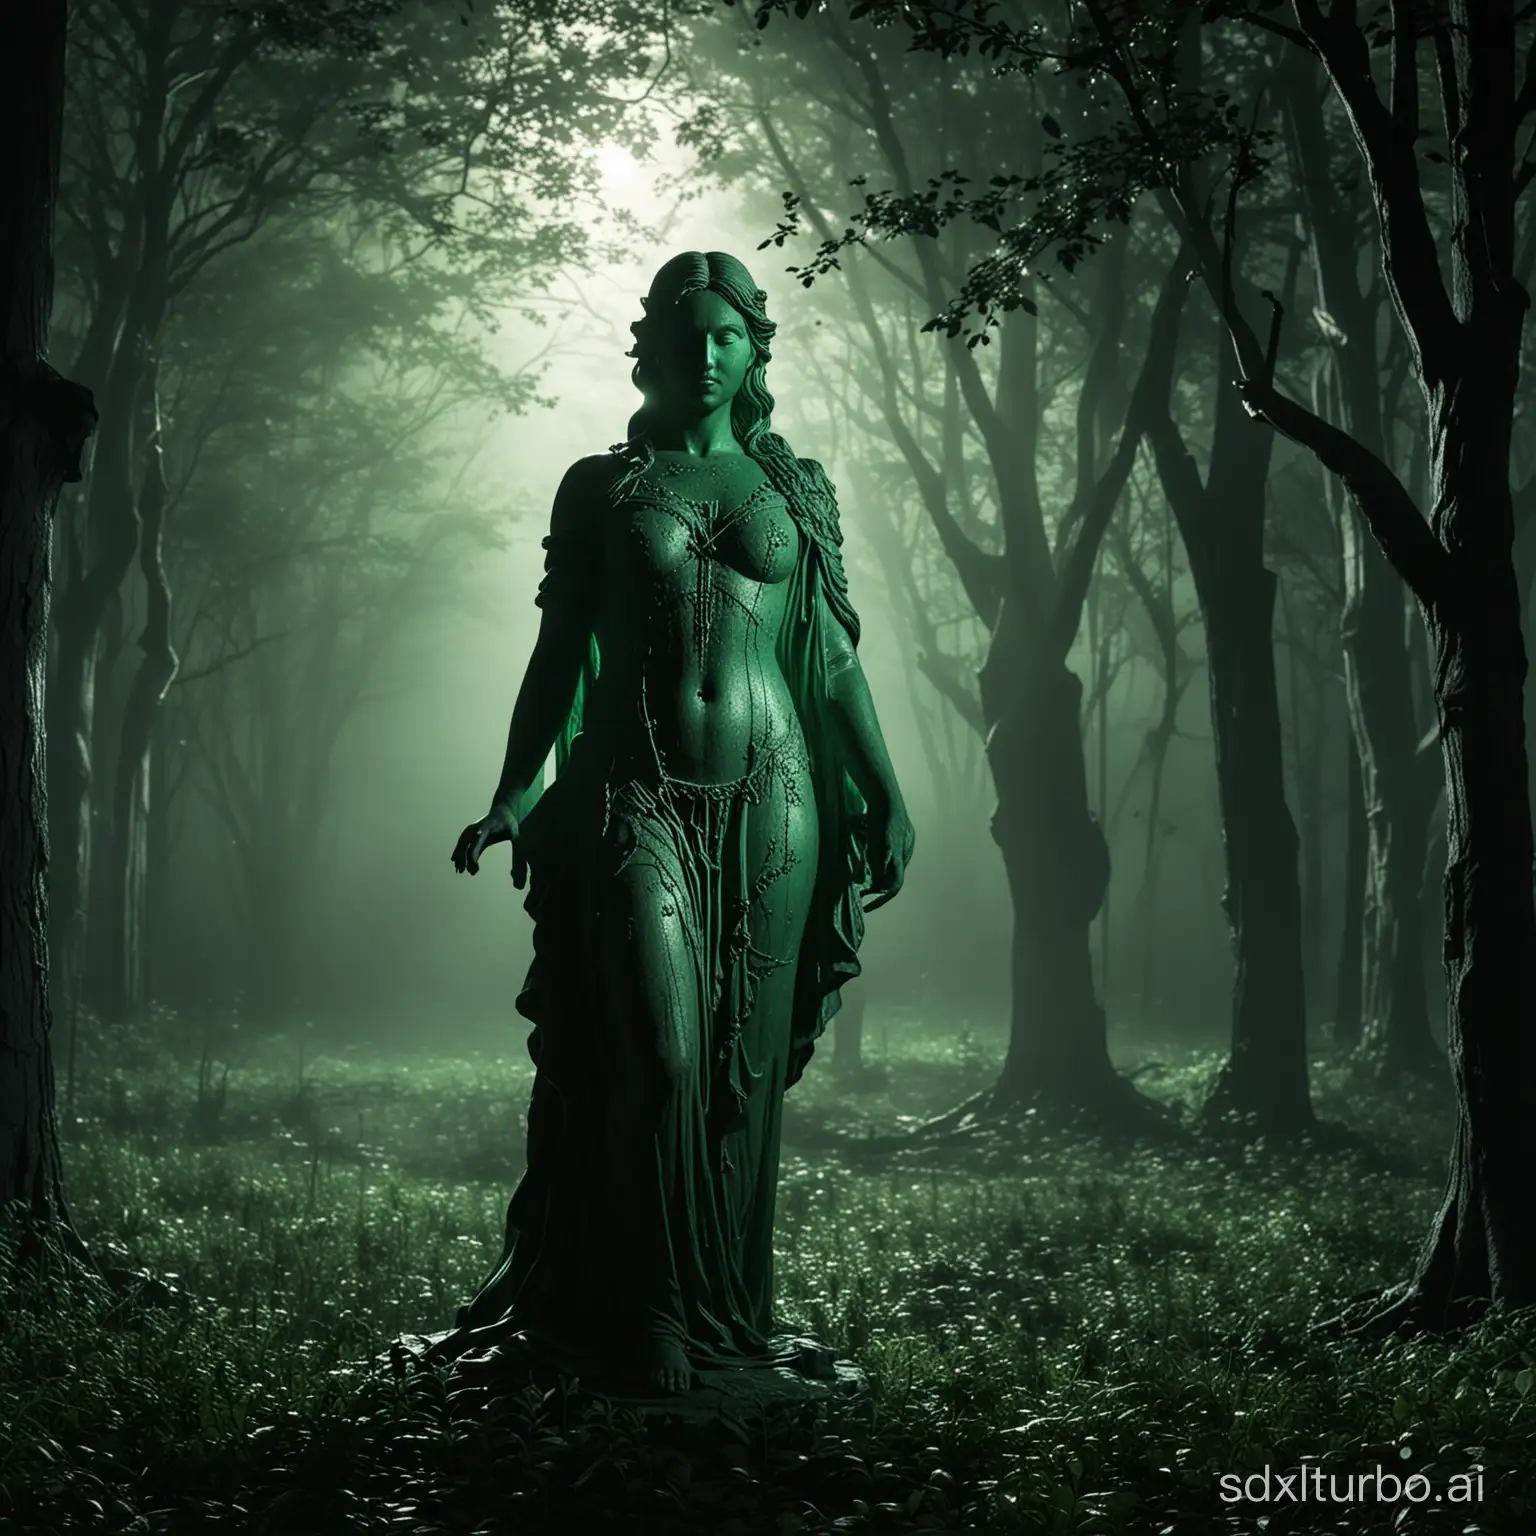 in the dark night,a green light glowing,sculpture,light shines on the sculpture,surrounding by all kinds of trees,, (masterpiece:1.3), (best quality:1.3), (high resolution:1.2), (high detail:1.2),